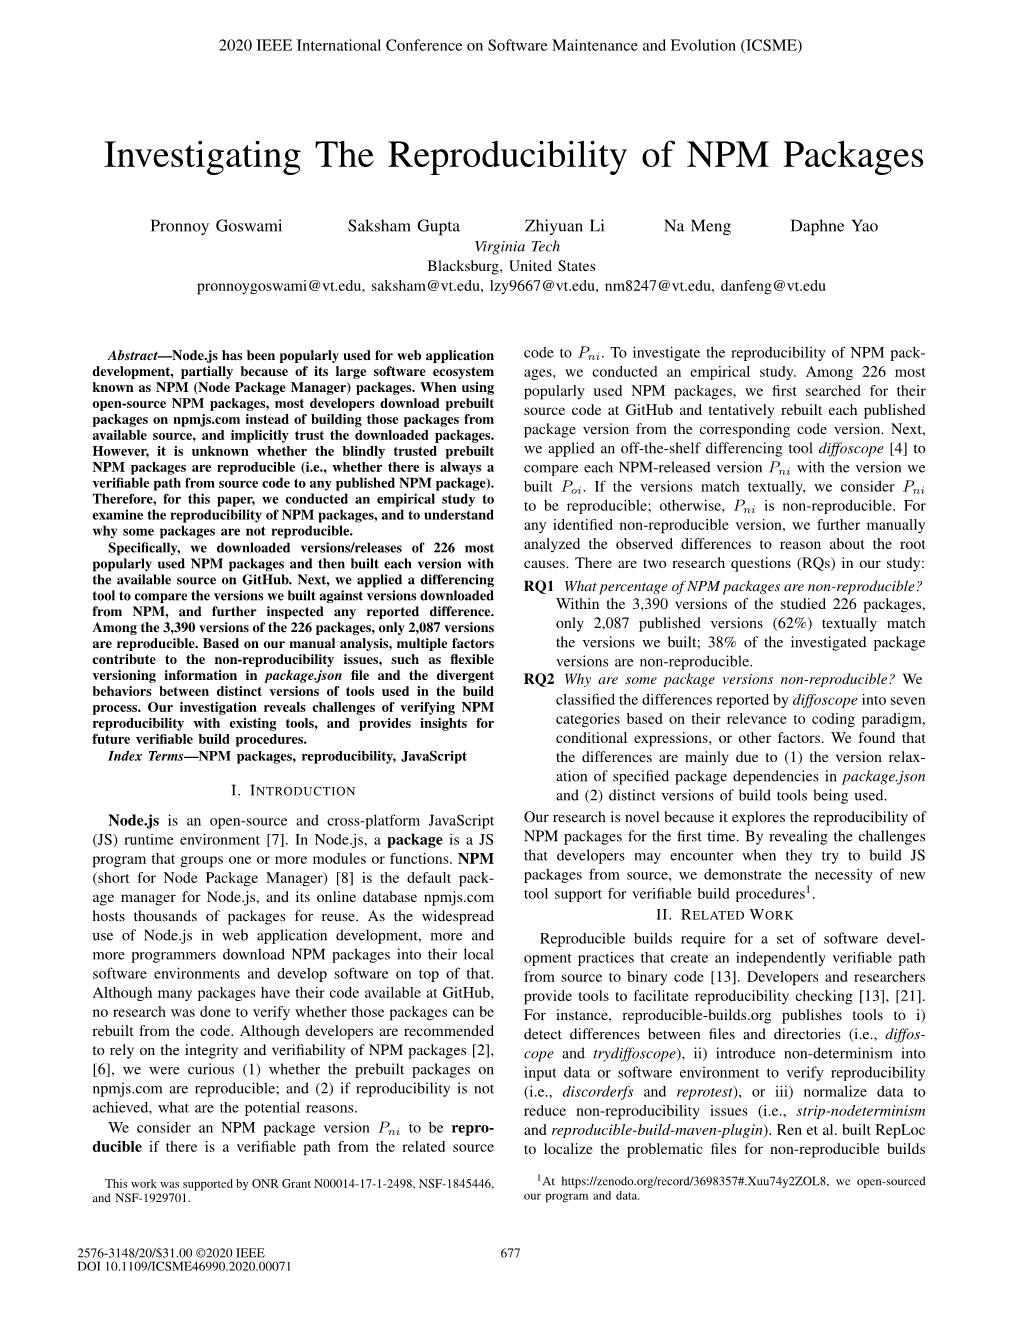 Investigating the Reproducibility of NPM Packages